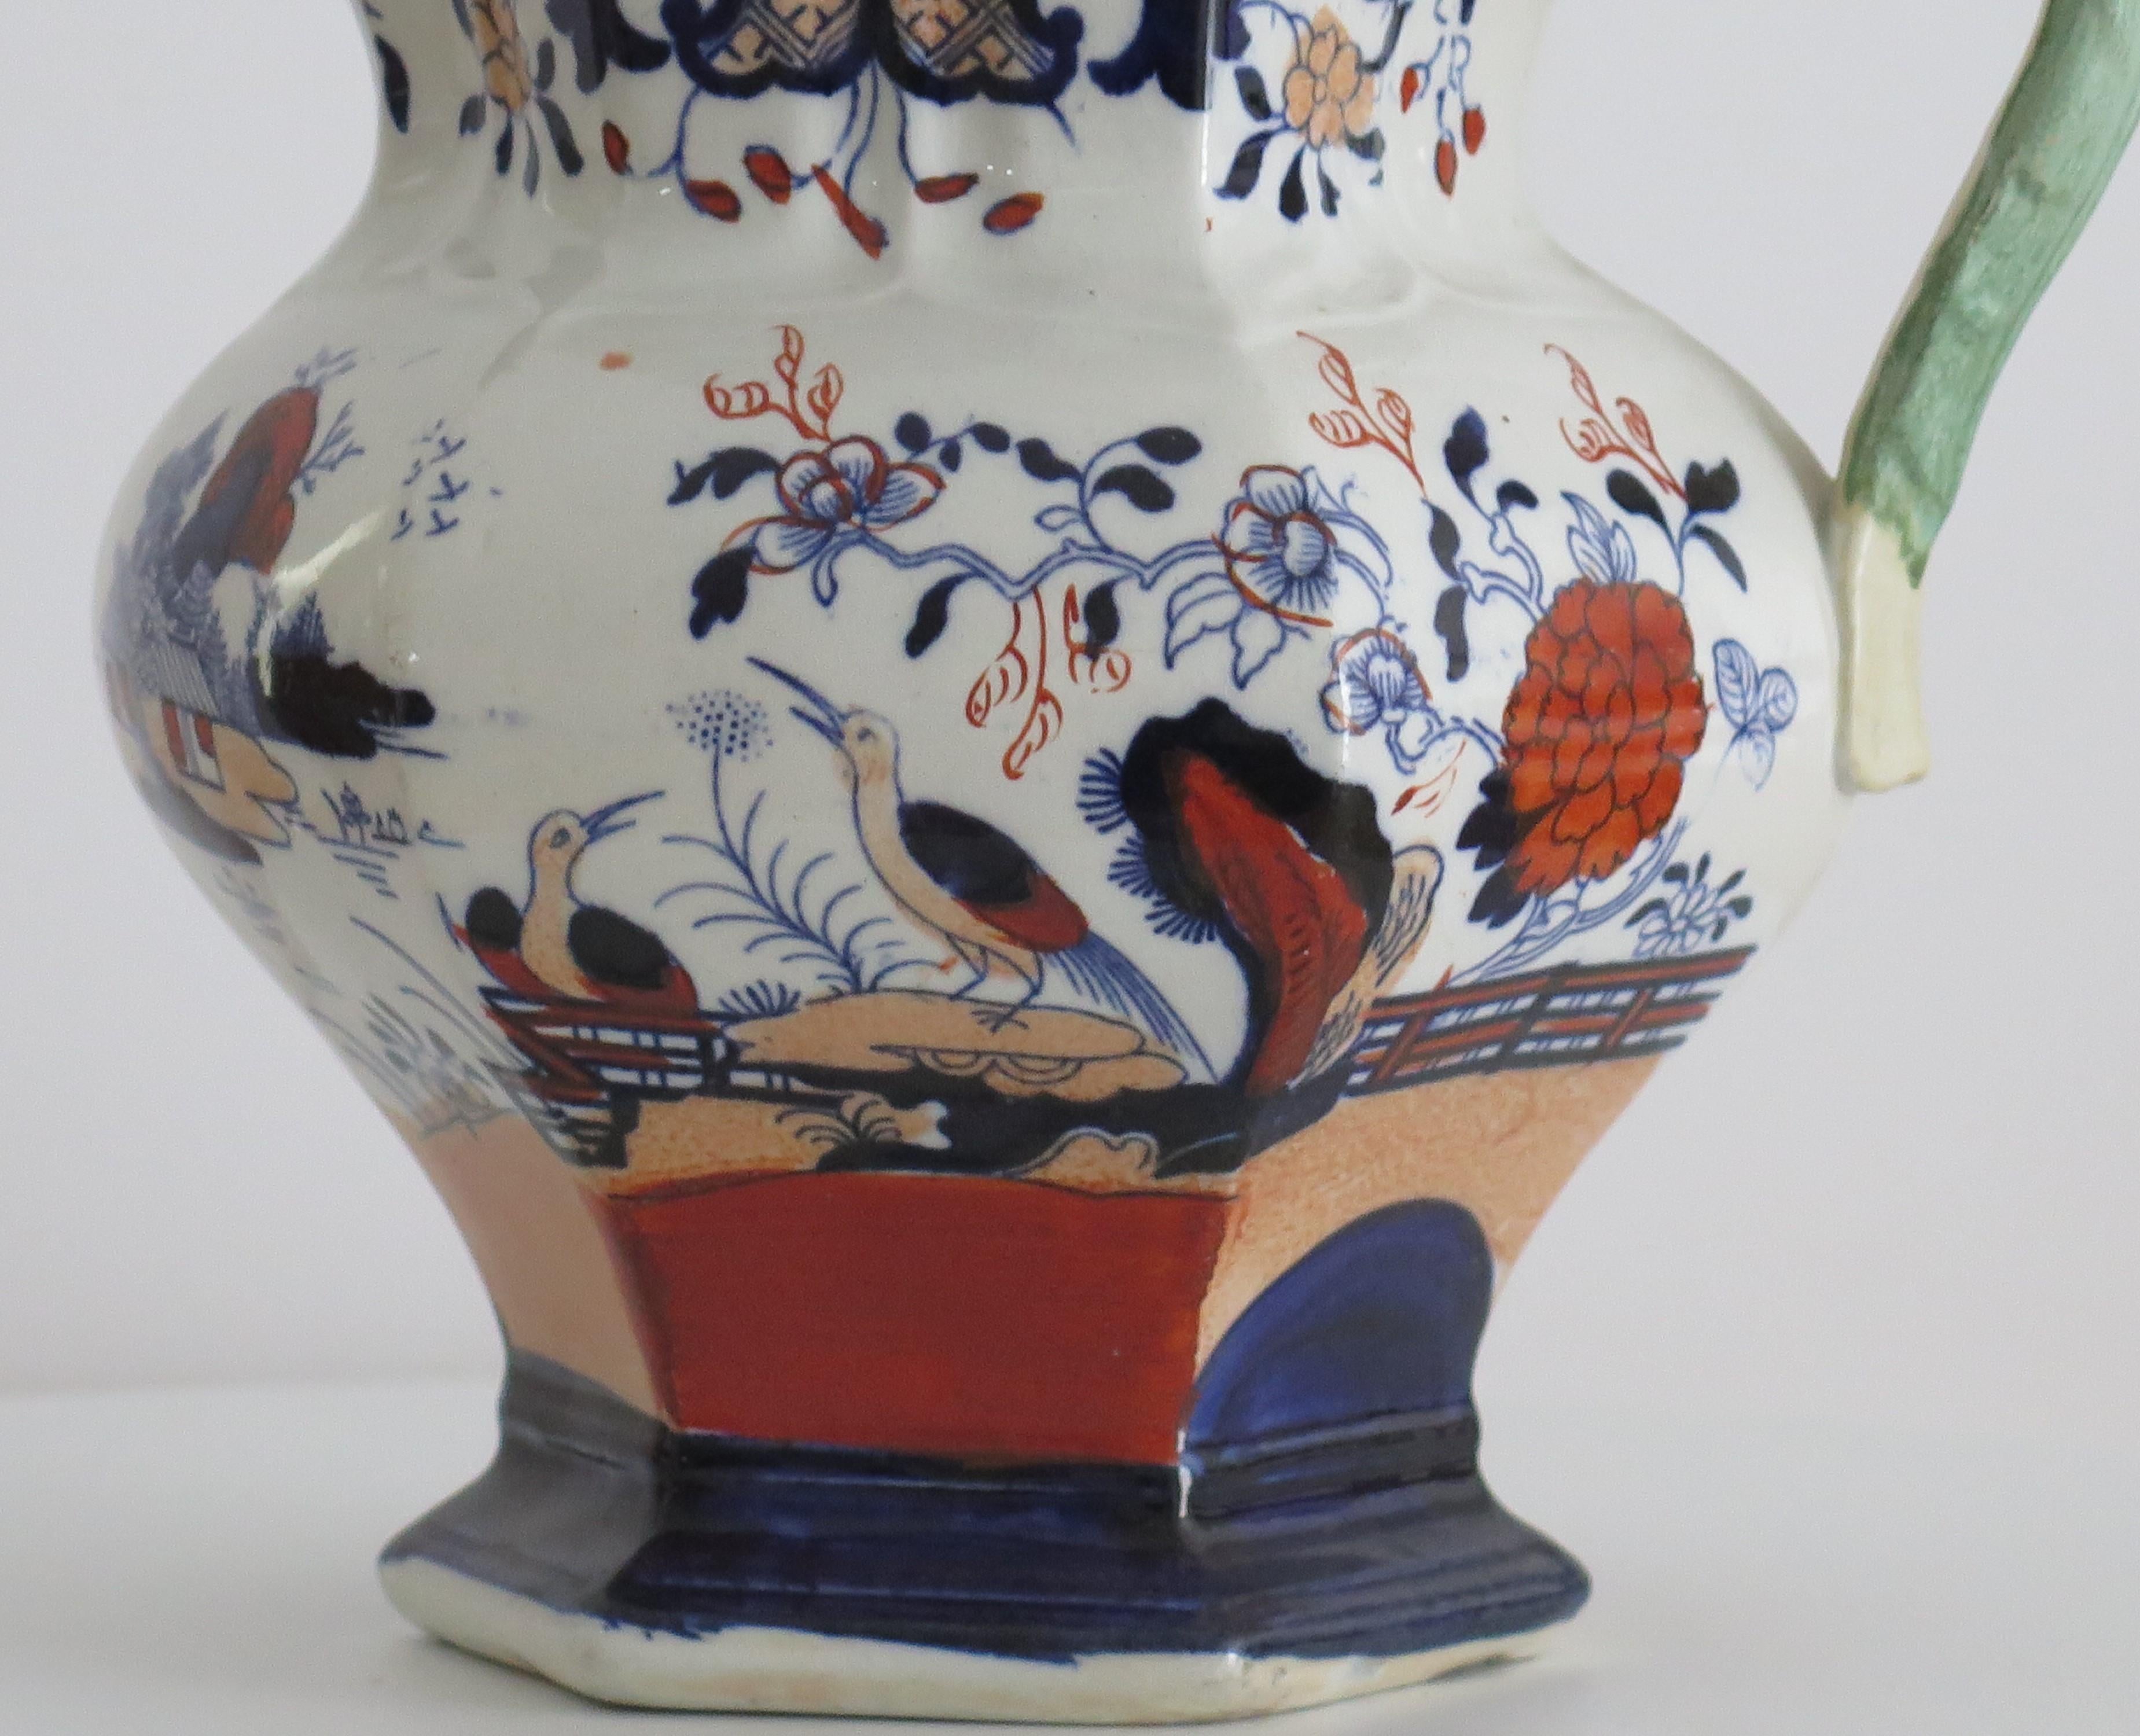 Hand-Painted Large Mason's Ironstone Jug or Pitcher in rare Heron Pattern, Circa 1830